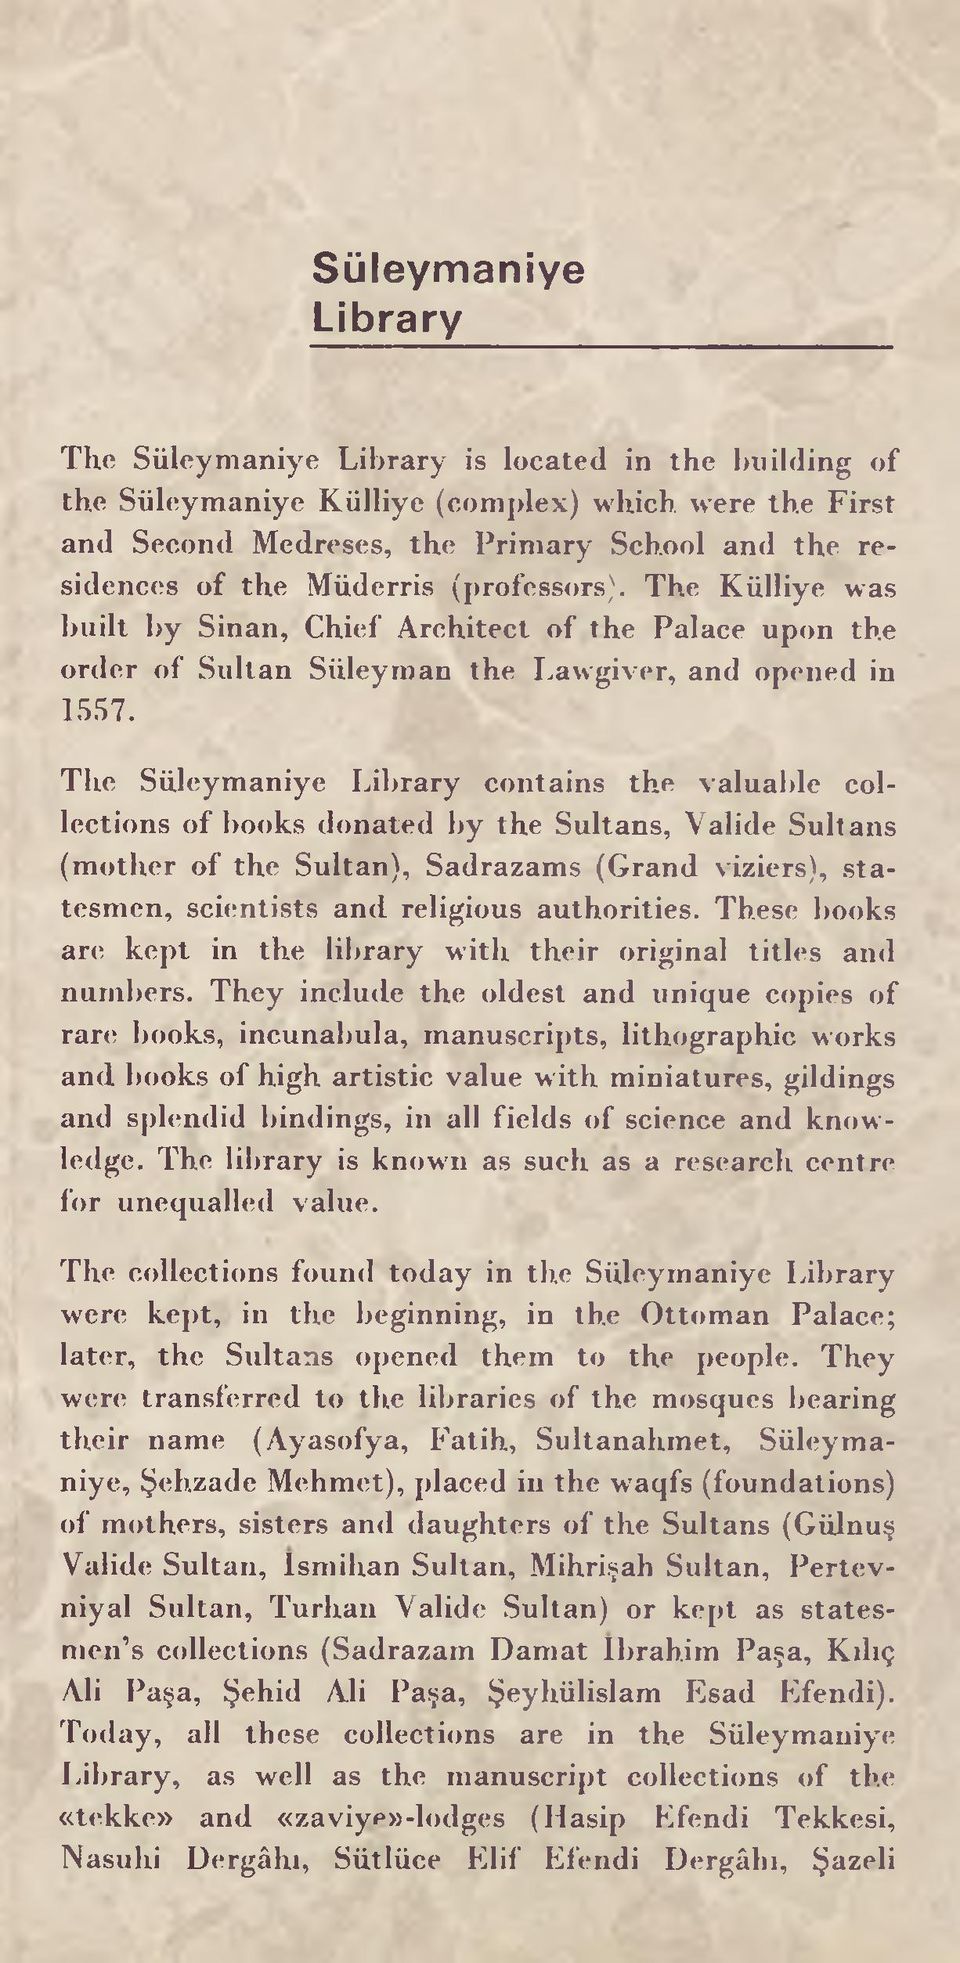 The Süleymaniye Library contains the valuable collections of books donated by the Sultans, Valide Sultans (mother o f the Sultan), Sadrazams (Grand viziers), statesmen, scientists and religious